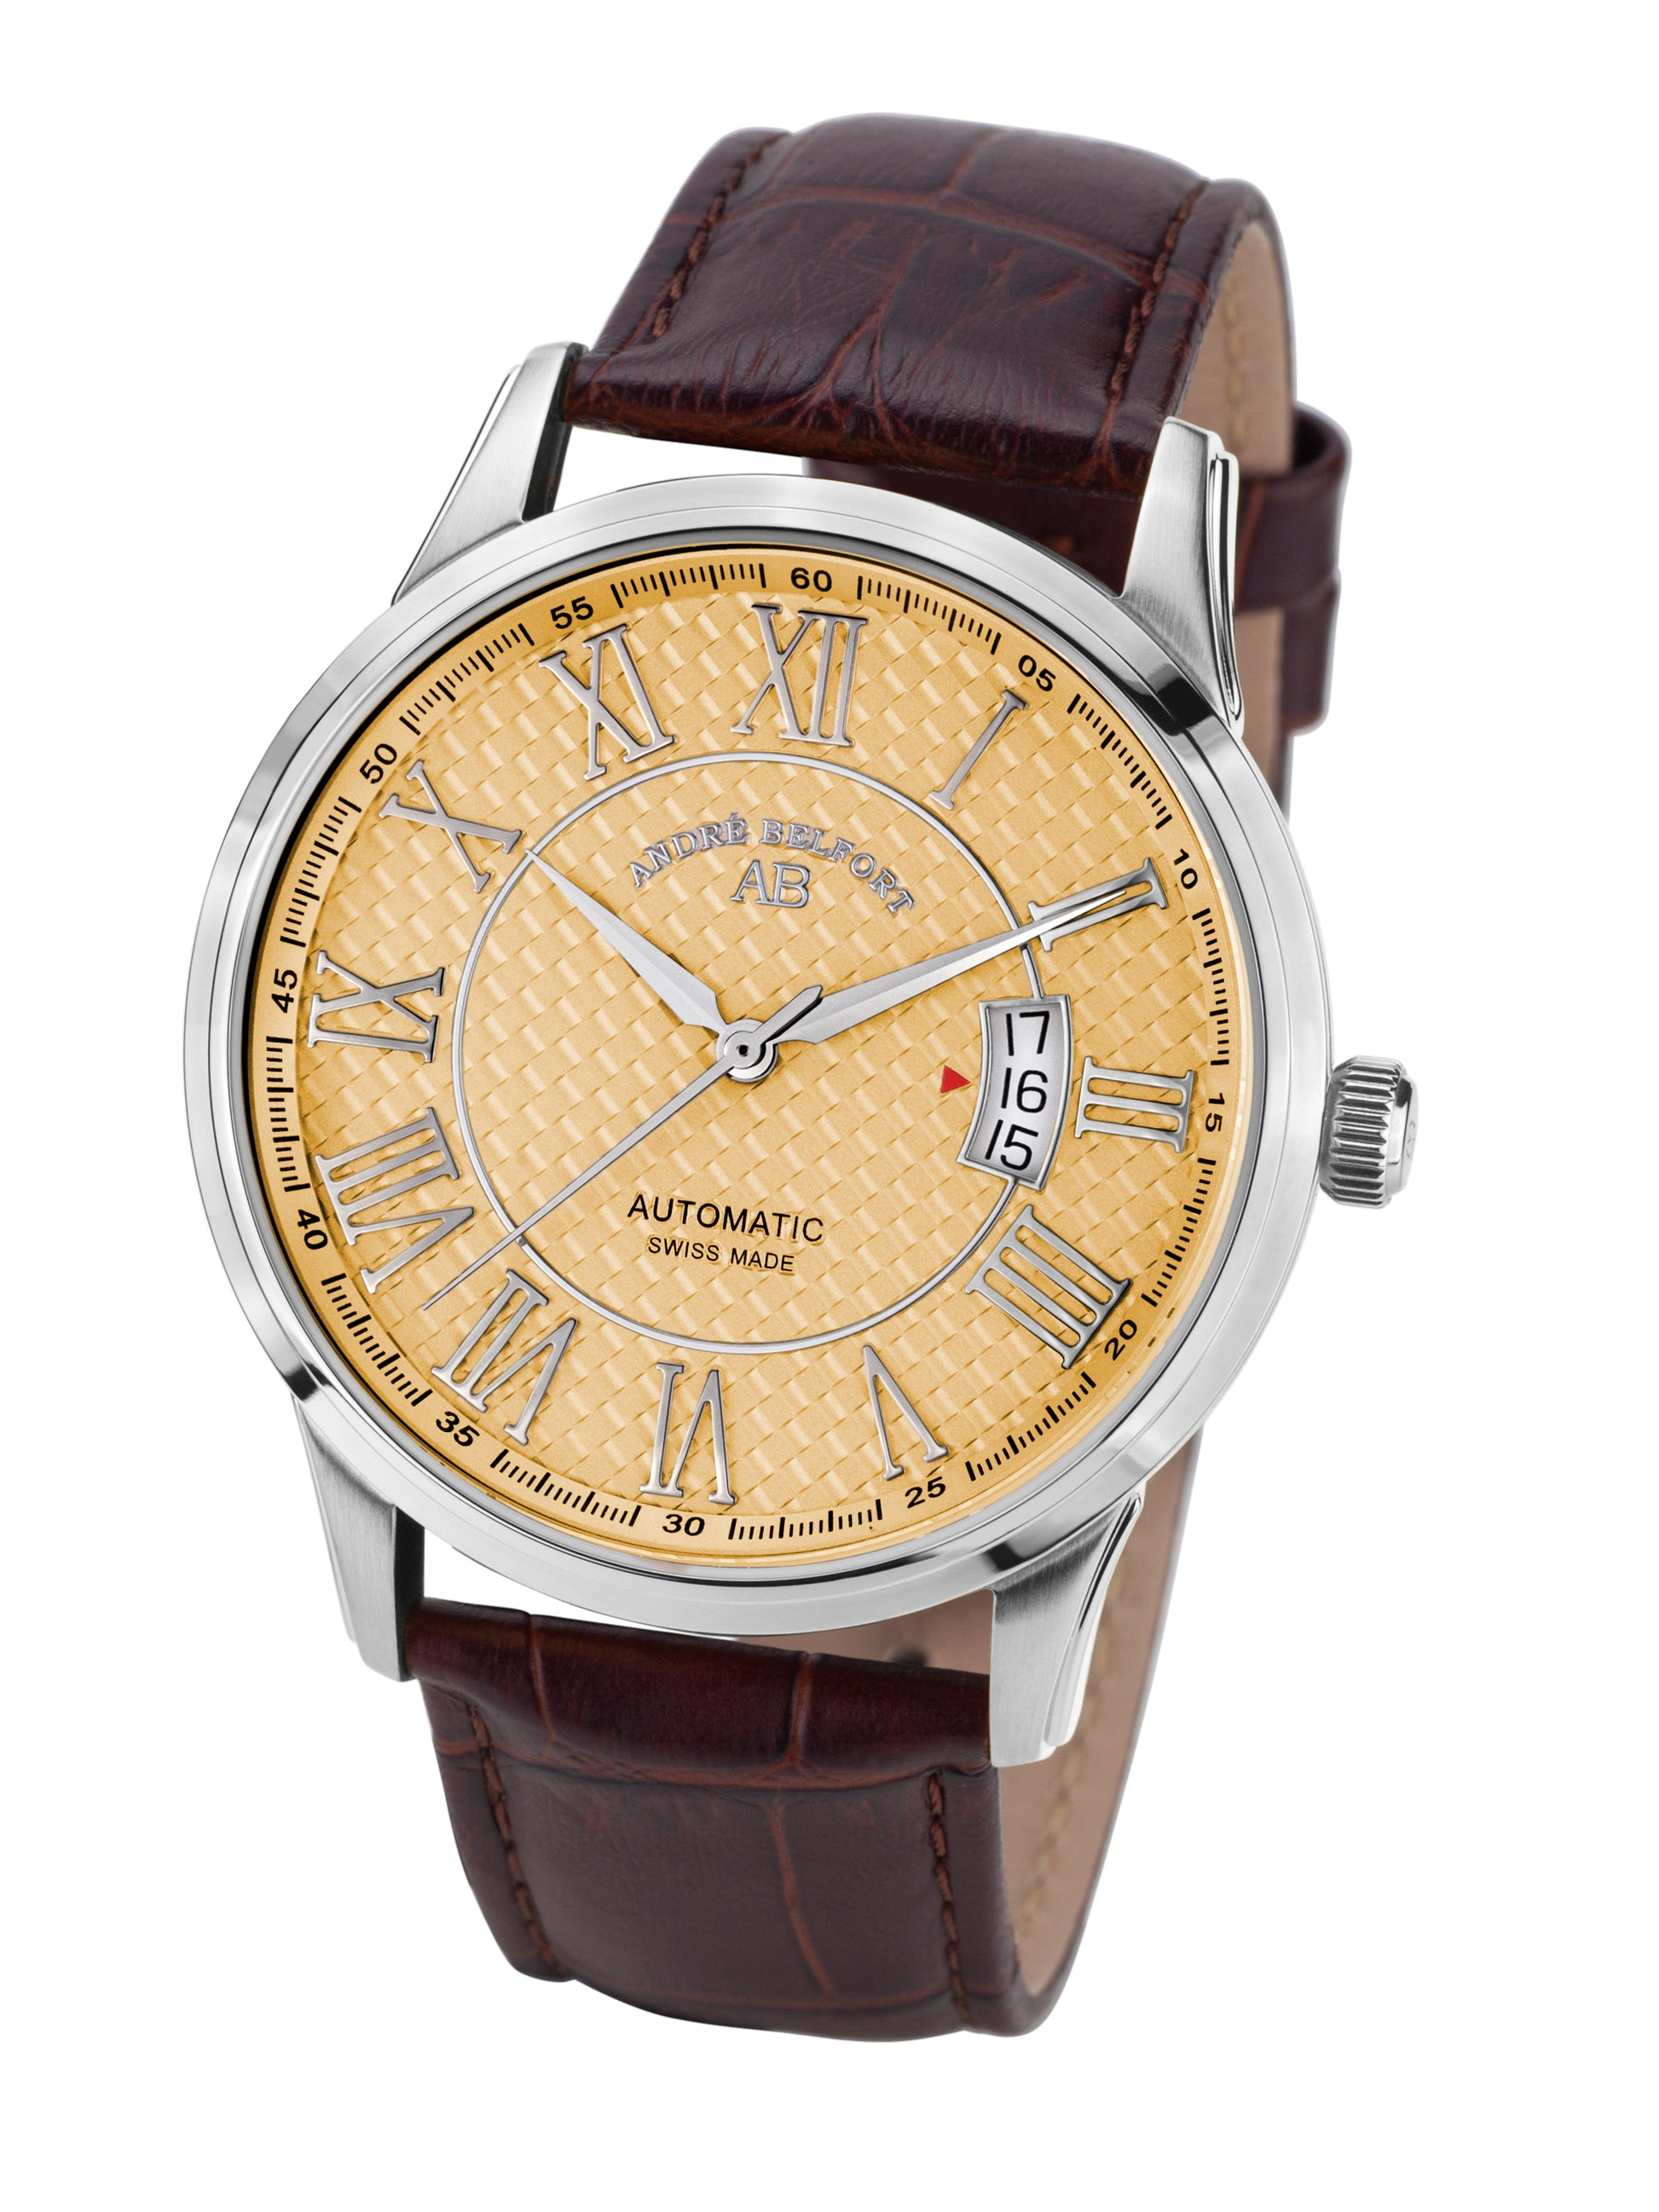 Automatic watches — Le Maître — André Belfort — steel champagner leather